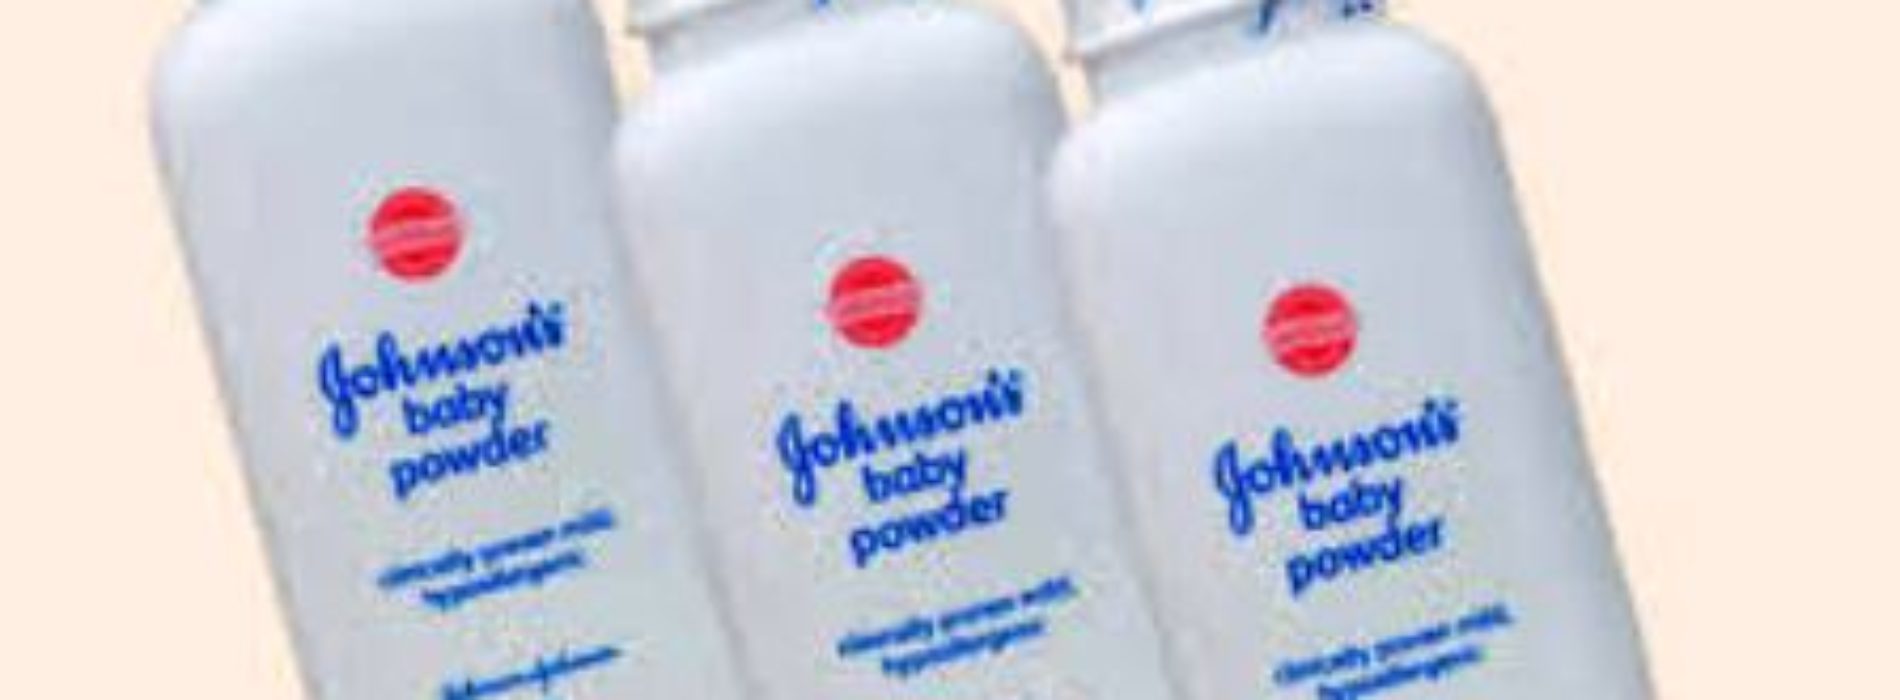 Johnson & Johnson recalls baby powder as asbestos trace is discovered in one bottle